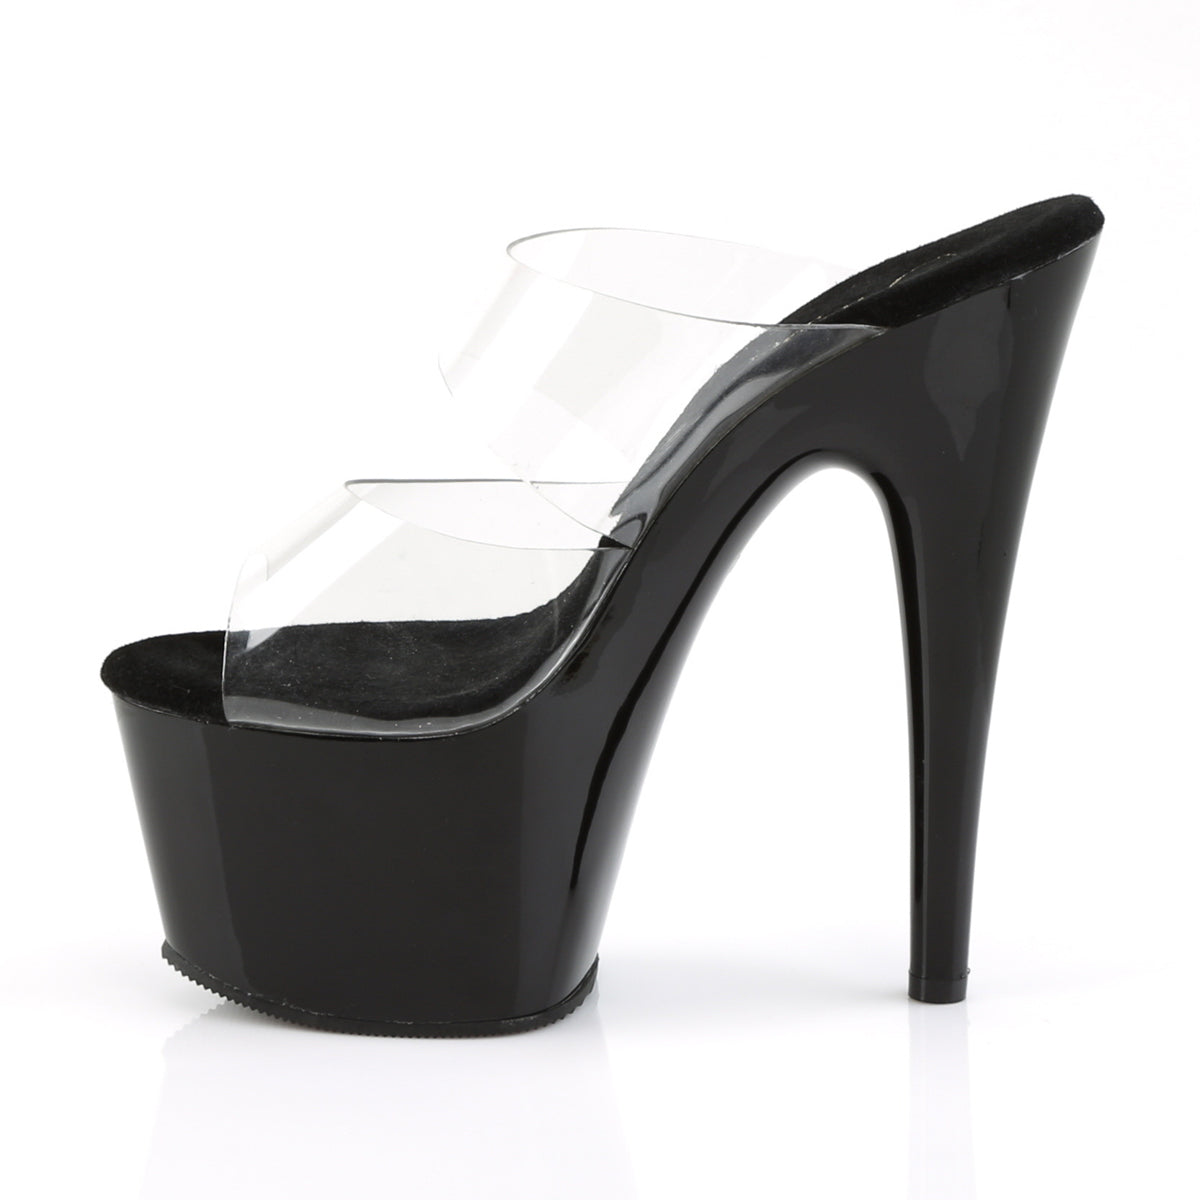 ADORE-702 7" Heel Clear and Black Strippers Platform Sandals-Pleaser- Sexy Shoes Pole Dance Heels